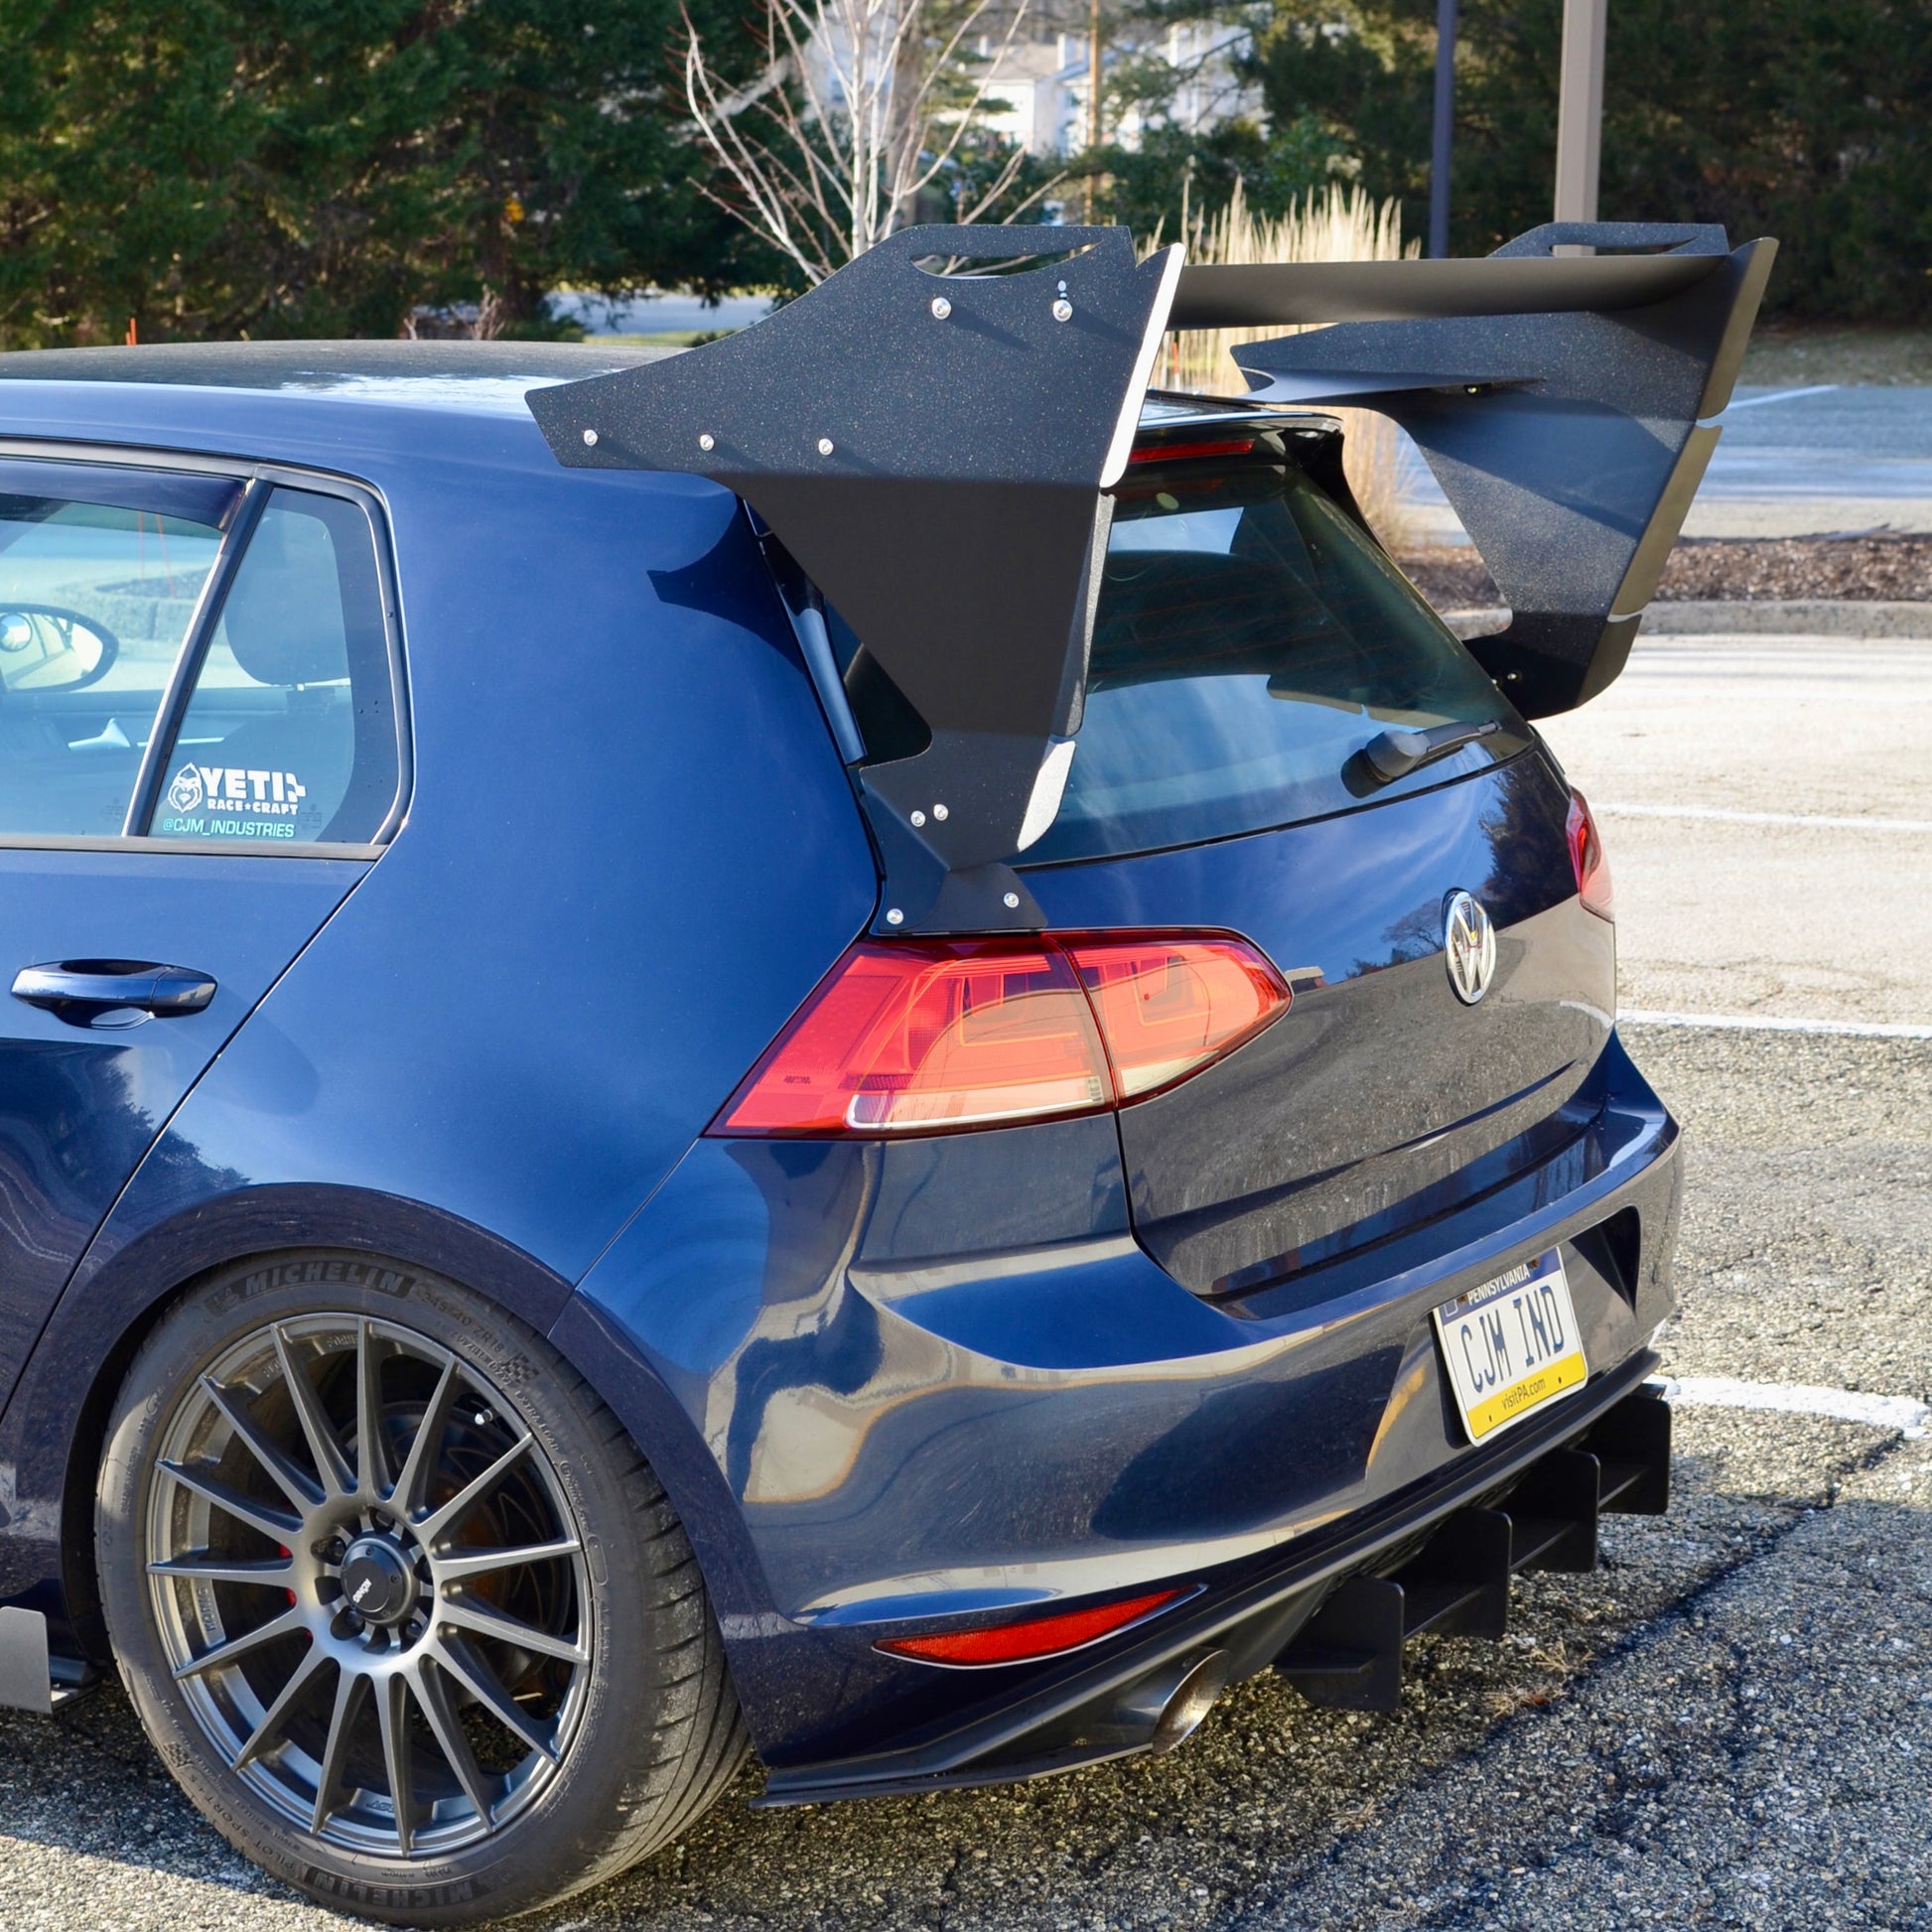 MK7 MK7.5 GTI Golf R rear wing chassis mounted downforce 2015 2016 2017 2018 2019 2020 